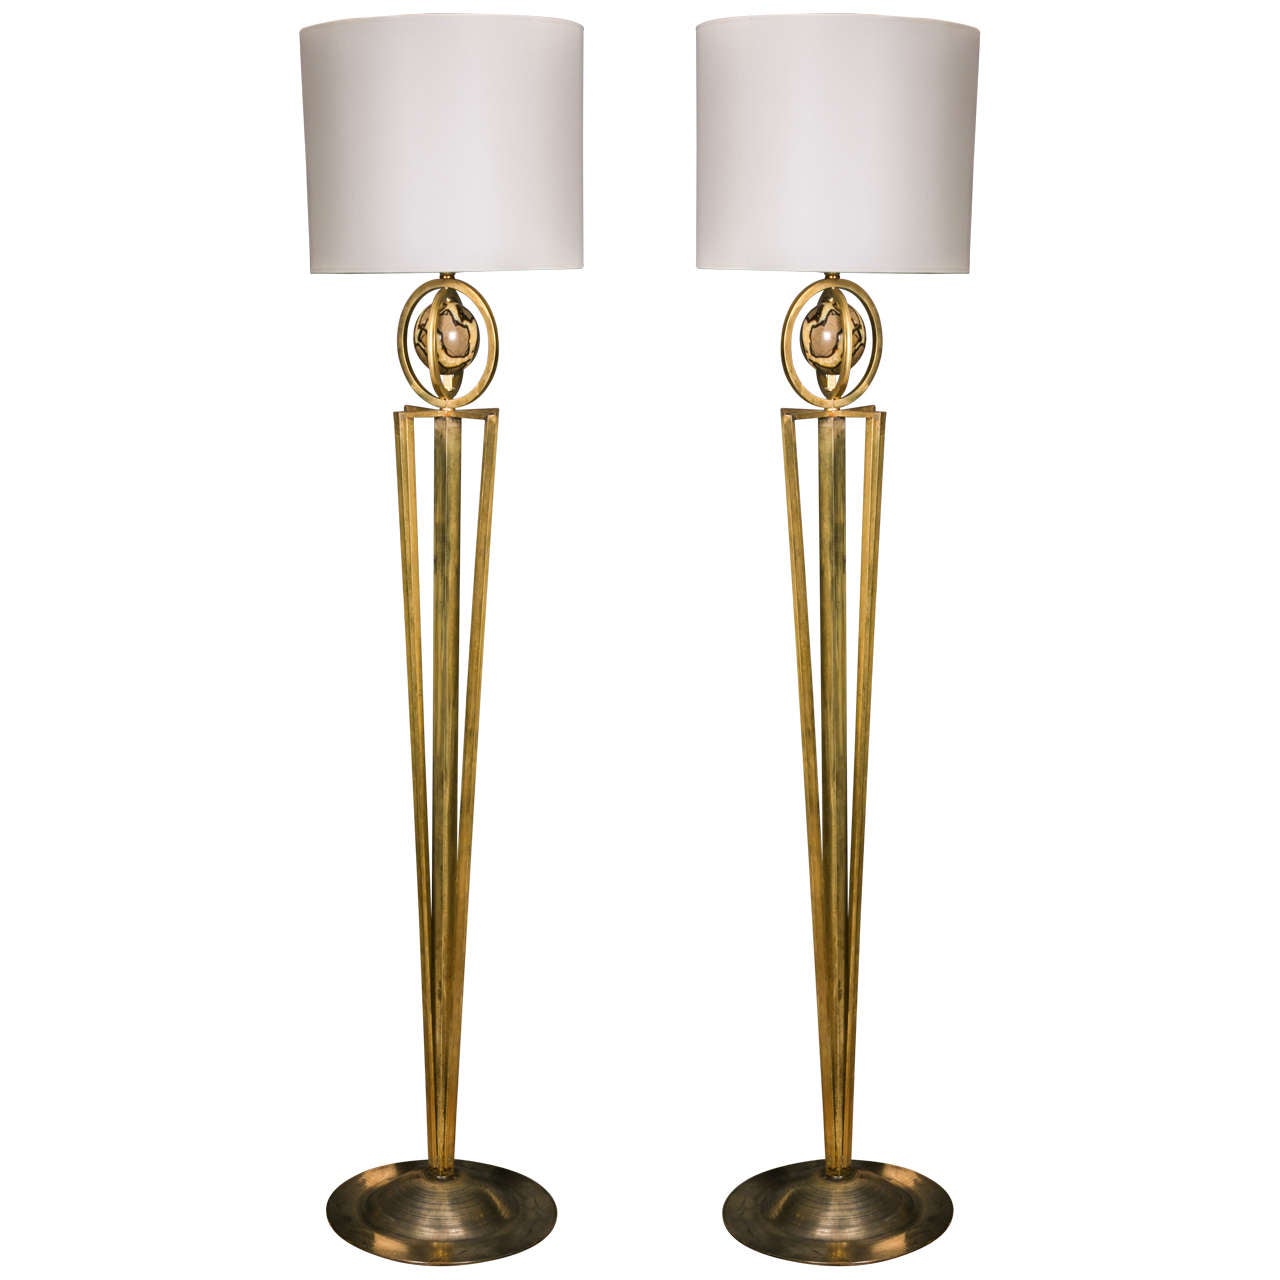 Pair of Floor Lamps with Septaria Stone Tops, Italy, 1980